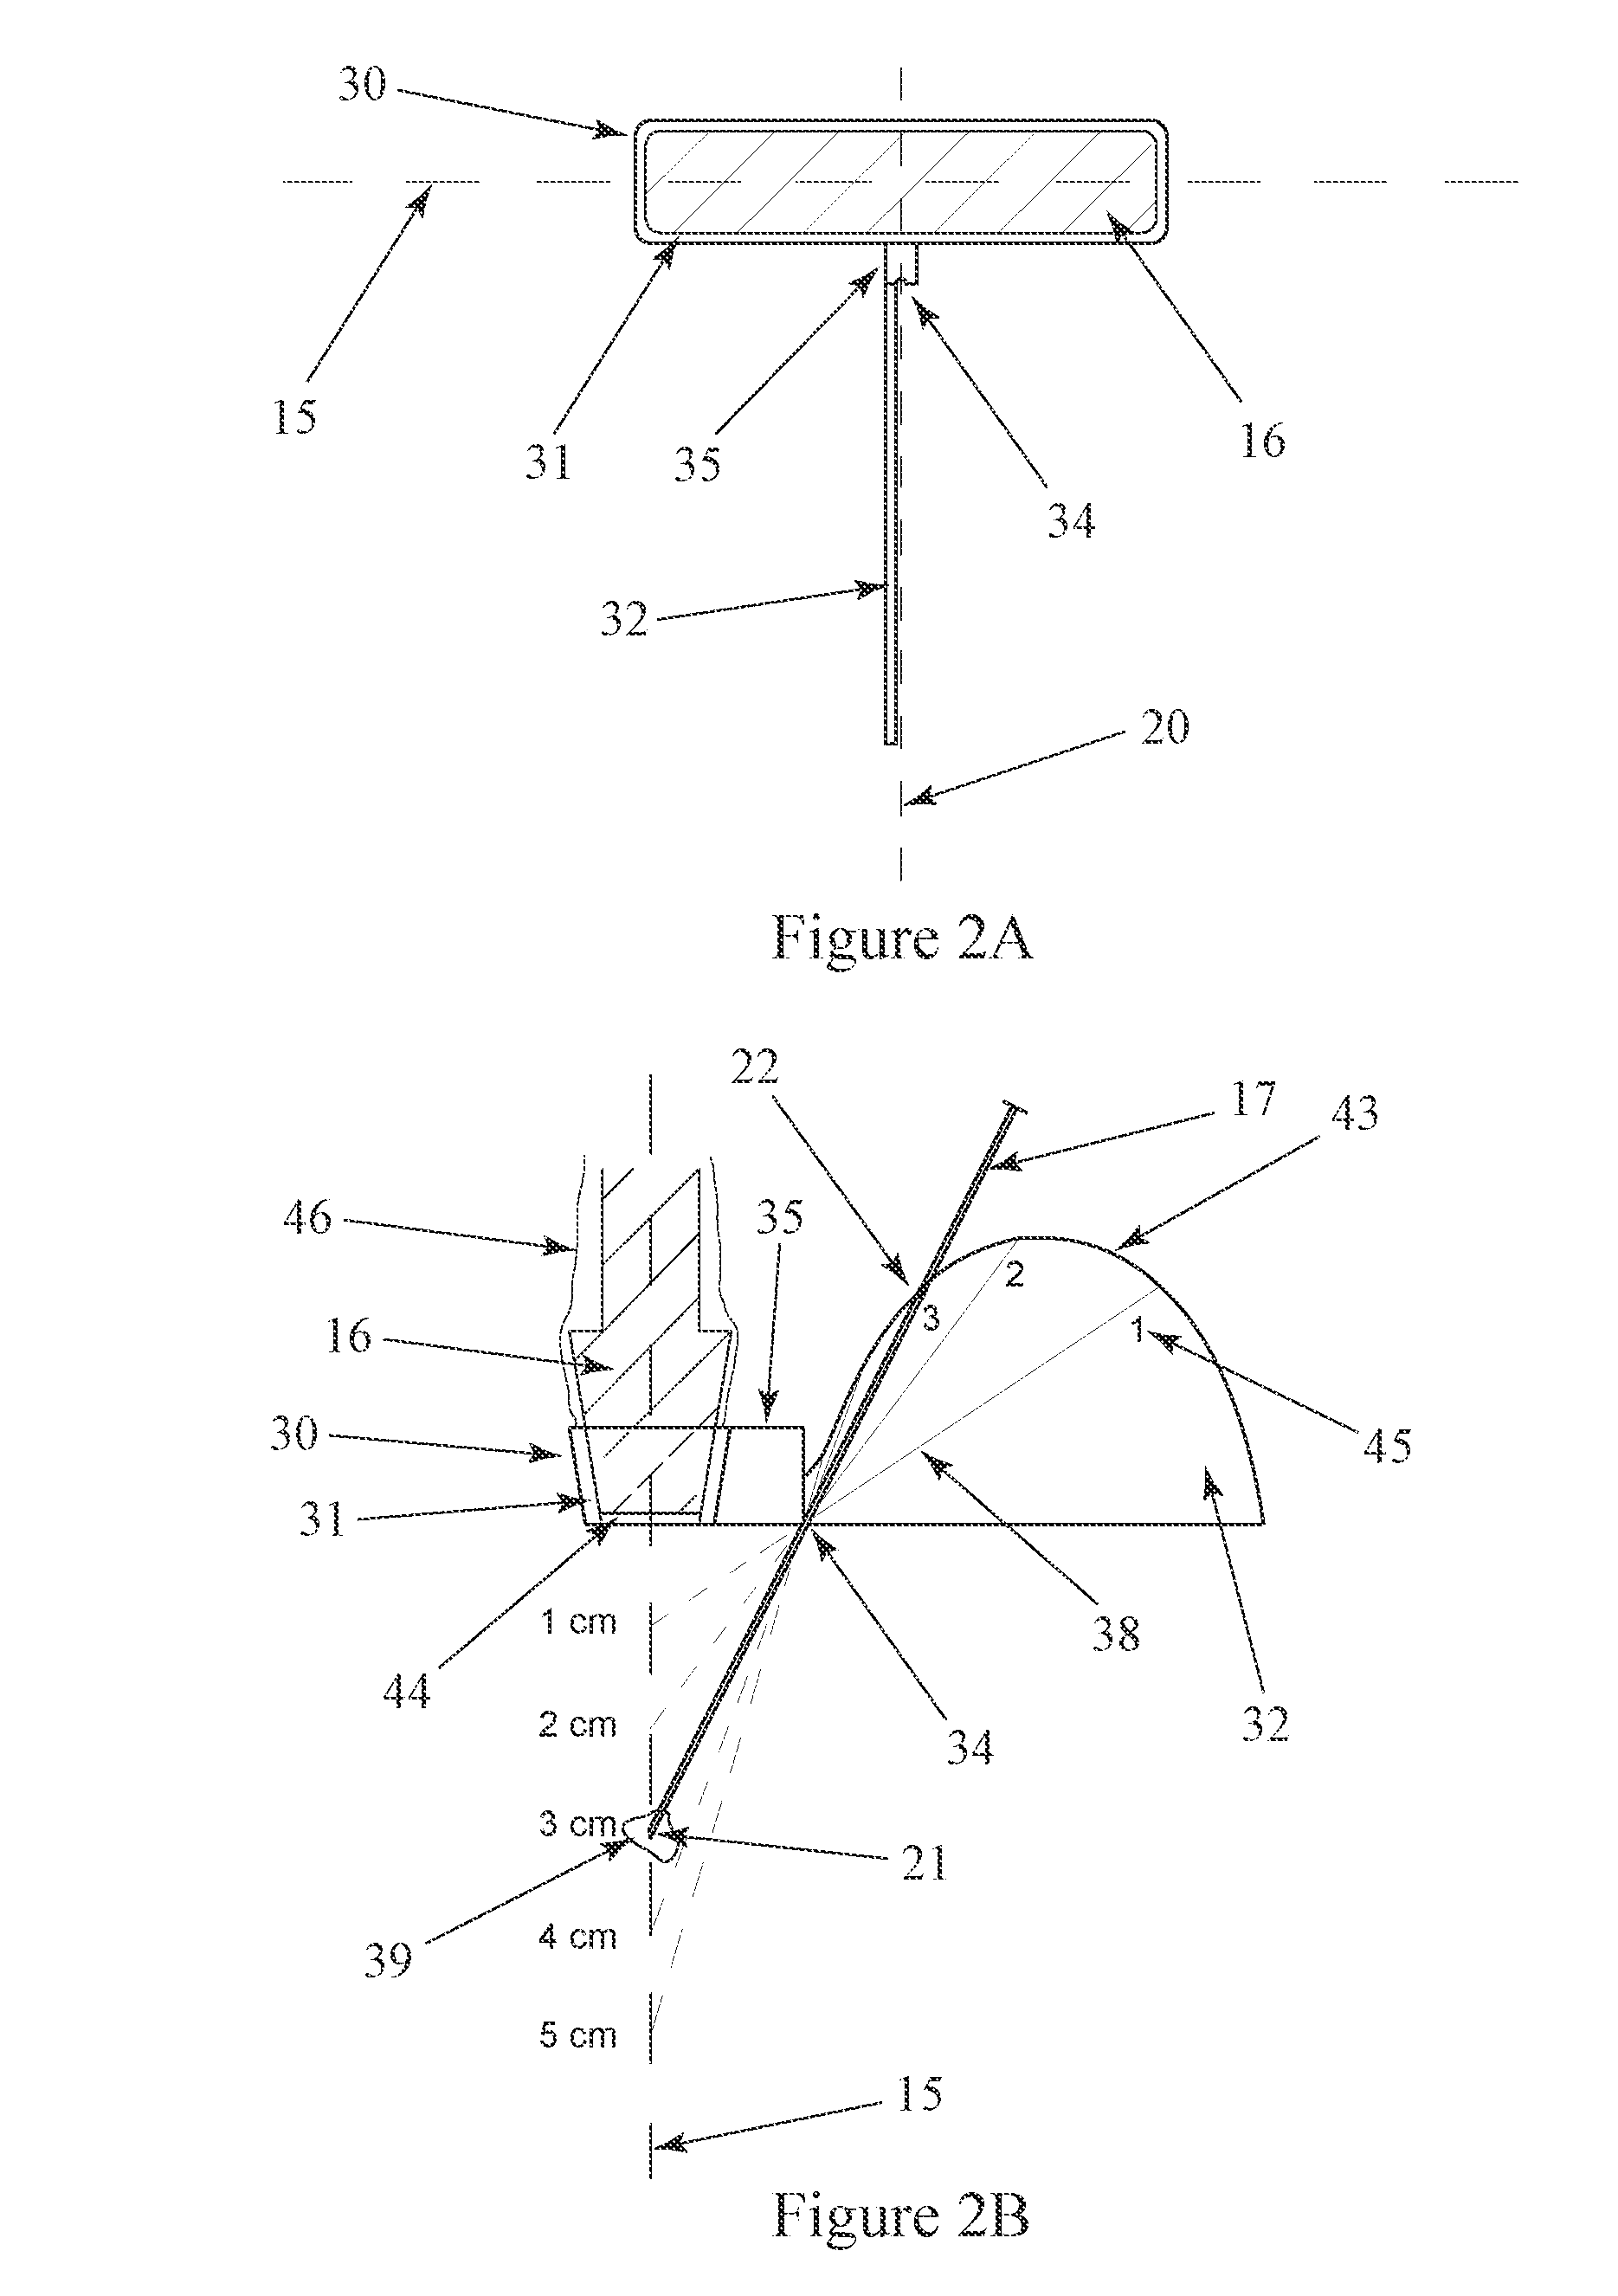 Apparatus for a needle director for an ultrasound transducer probe